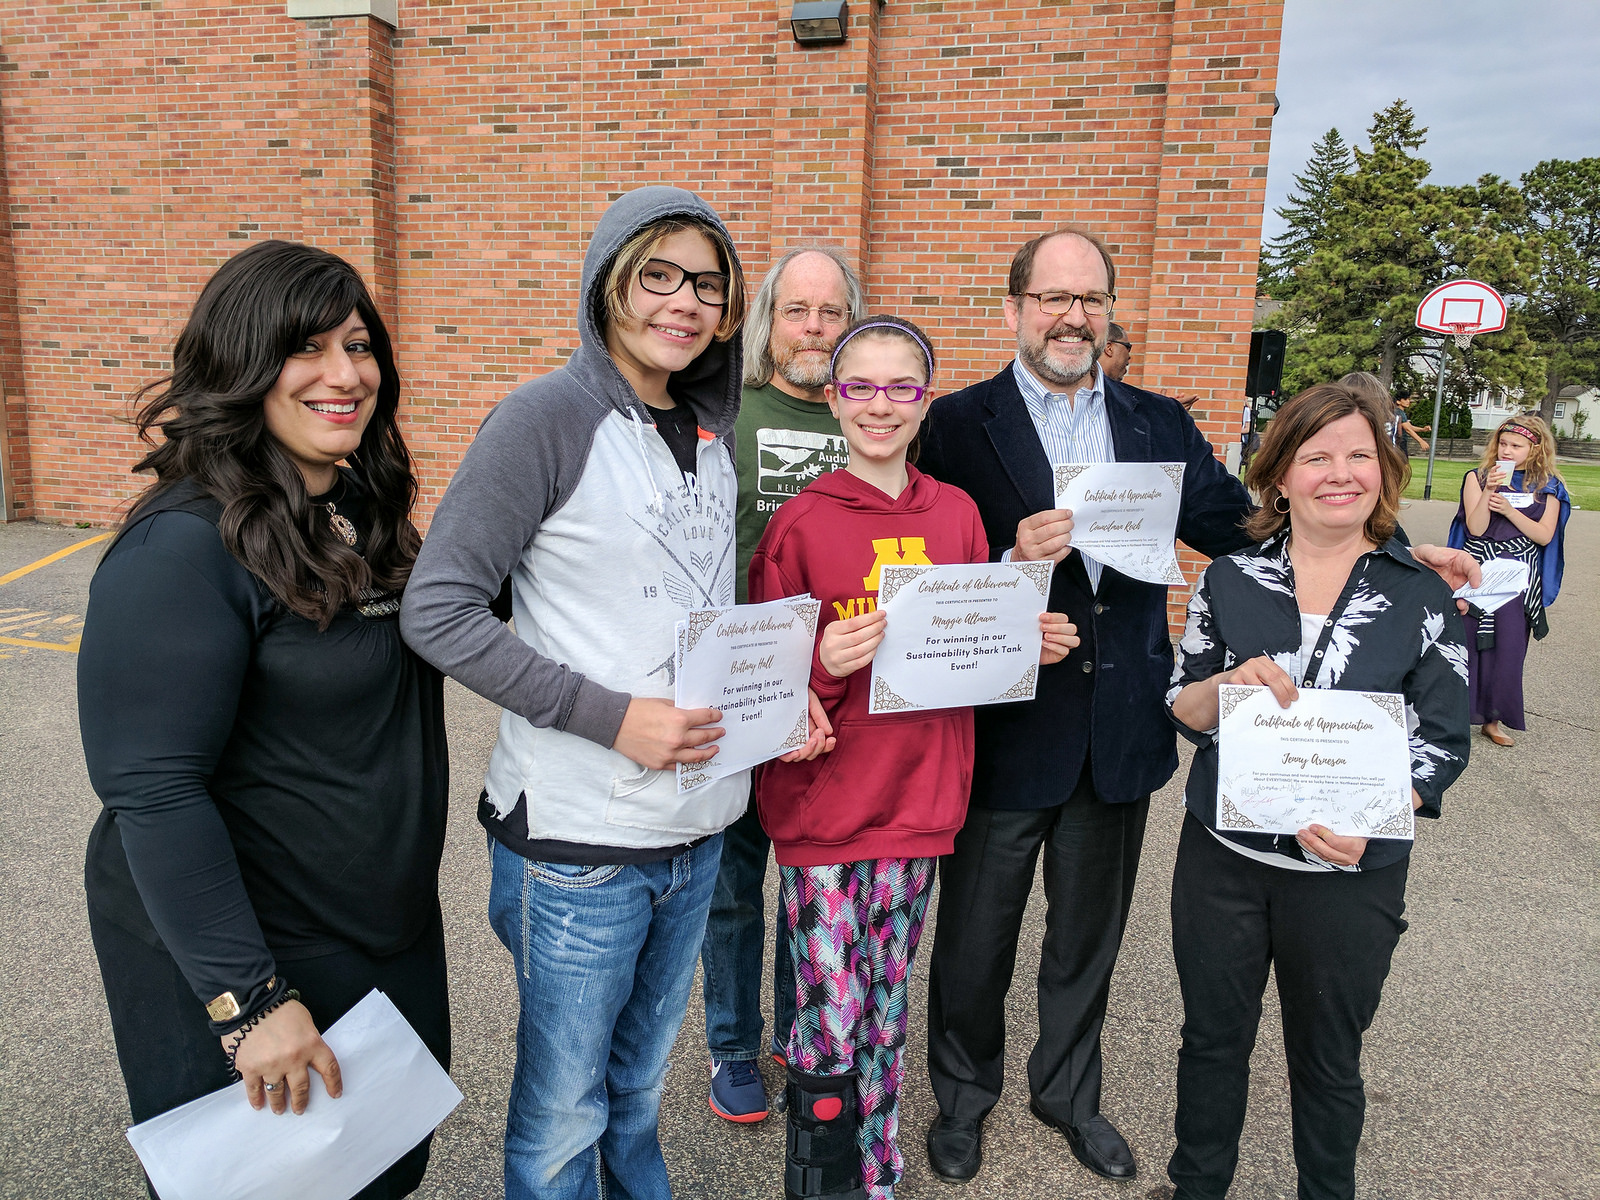 From left: Northeast Middle School Science Teacher Yosefa Carriger, student Brittany Hall, Audubon Neighborhood Association Board Member Don Sellers, student Maggie Altmann, MWMO Board Chairman Kevin Reich, and Minneapolis Board of Education Member Jenny Arneson.